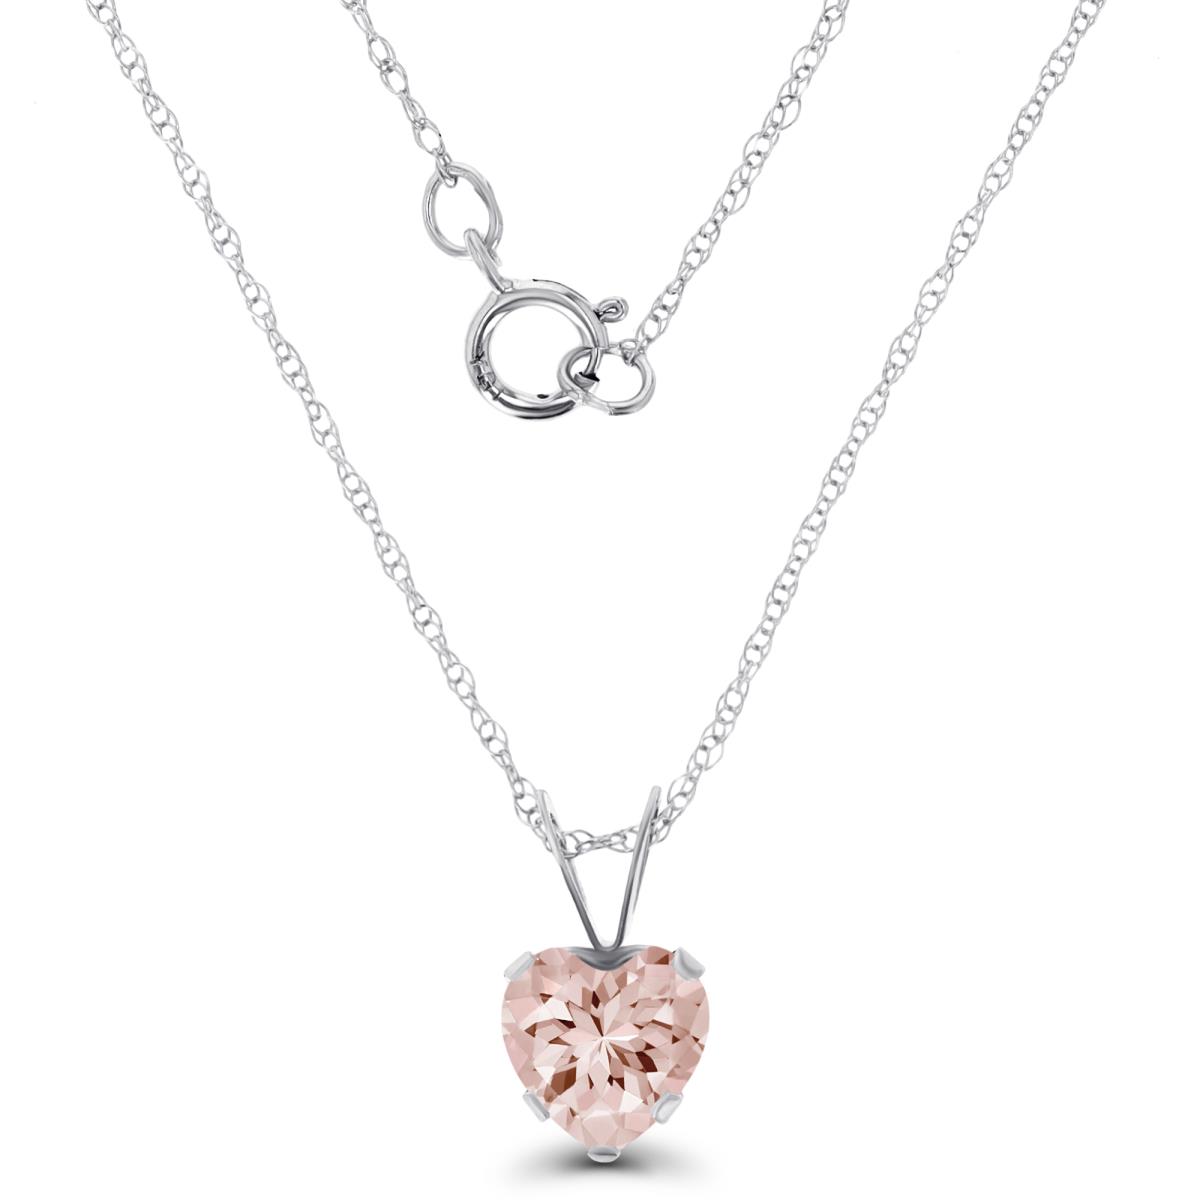 14K White Gold 6x6mm Heart Morganite 18" Rope Chain Necklace